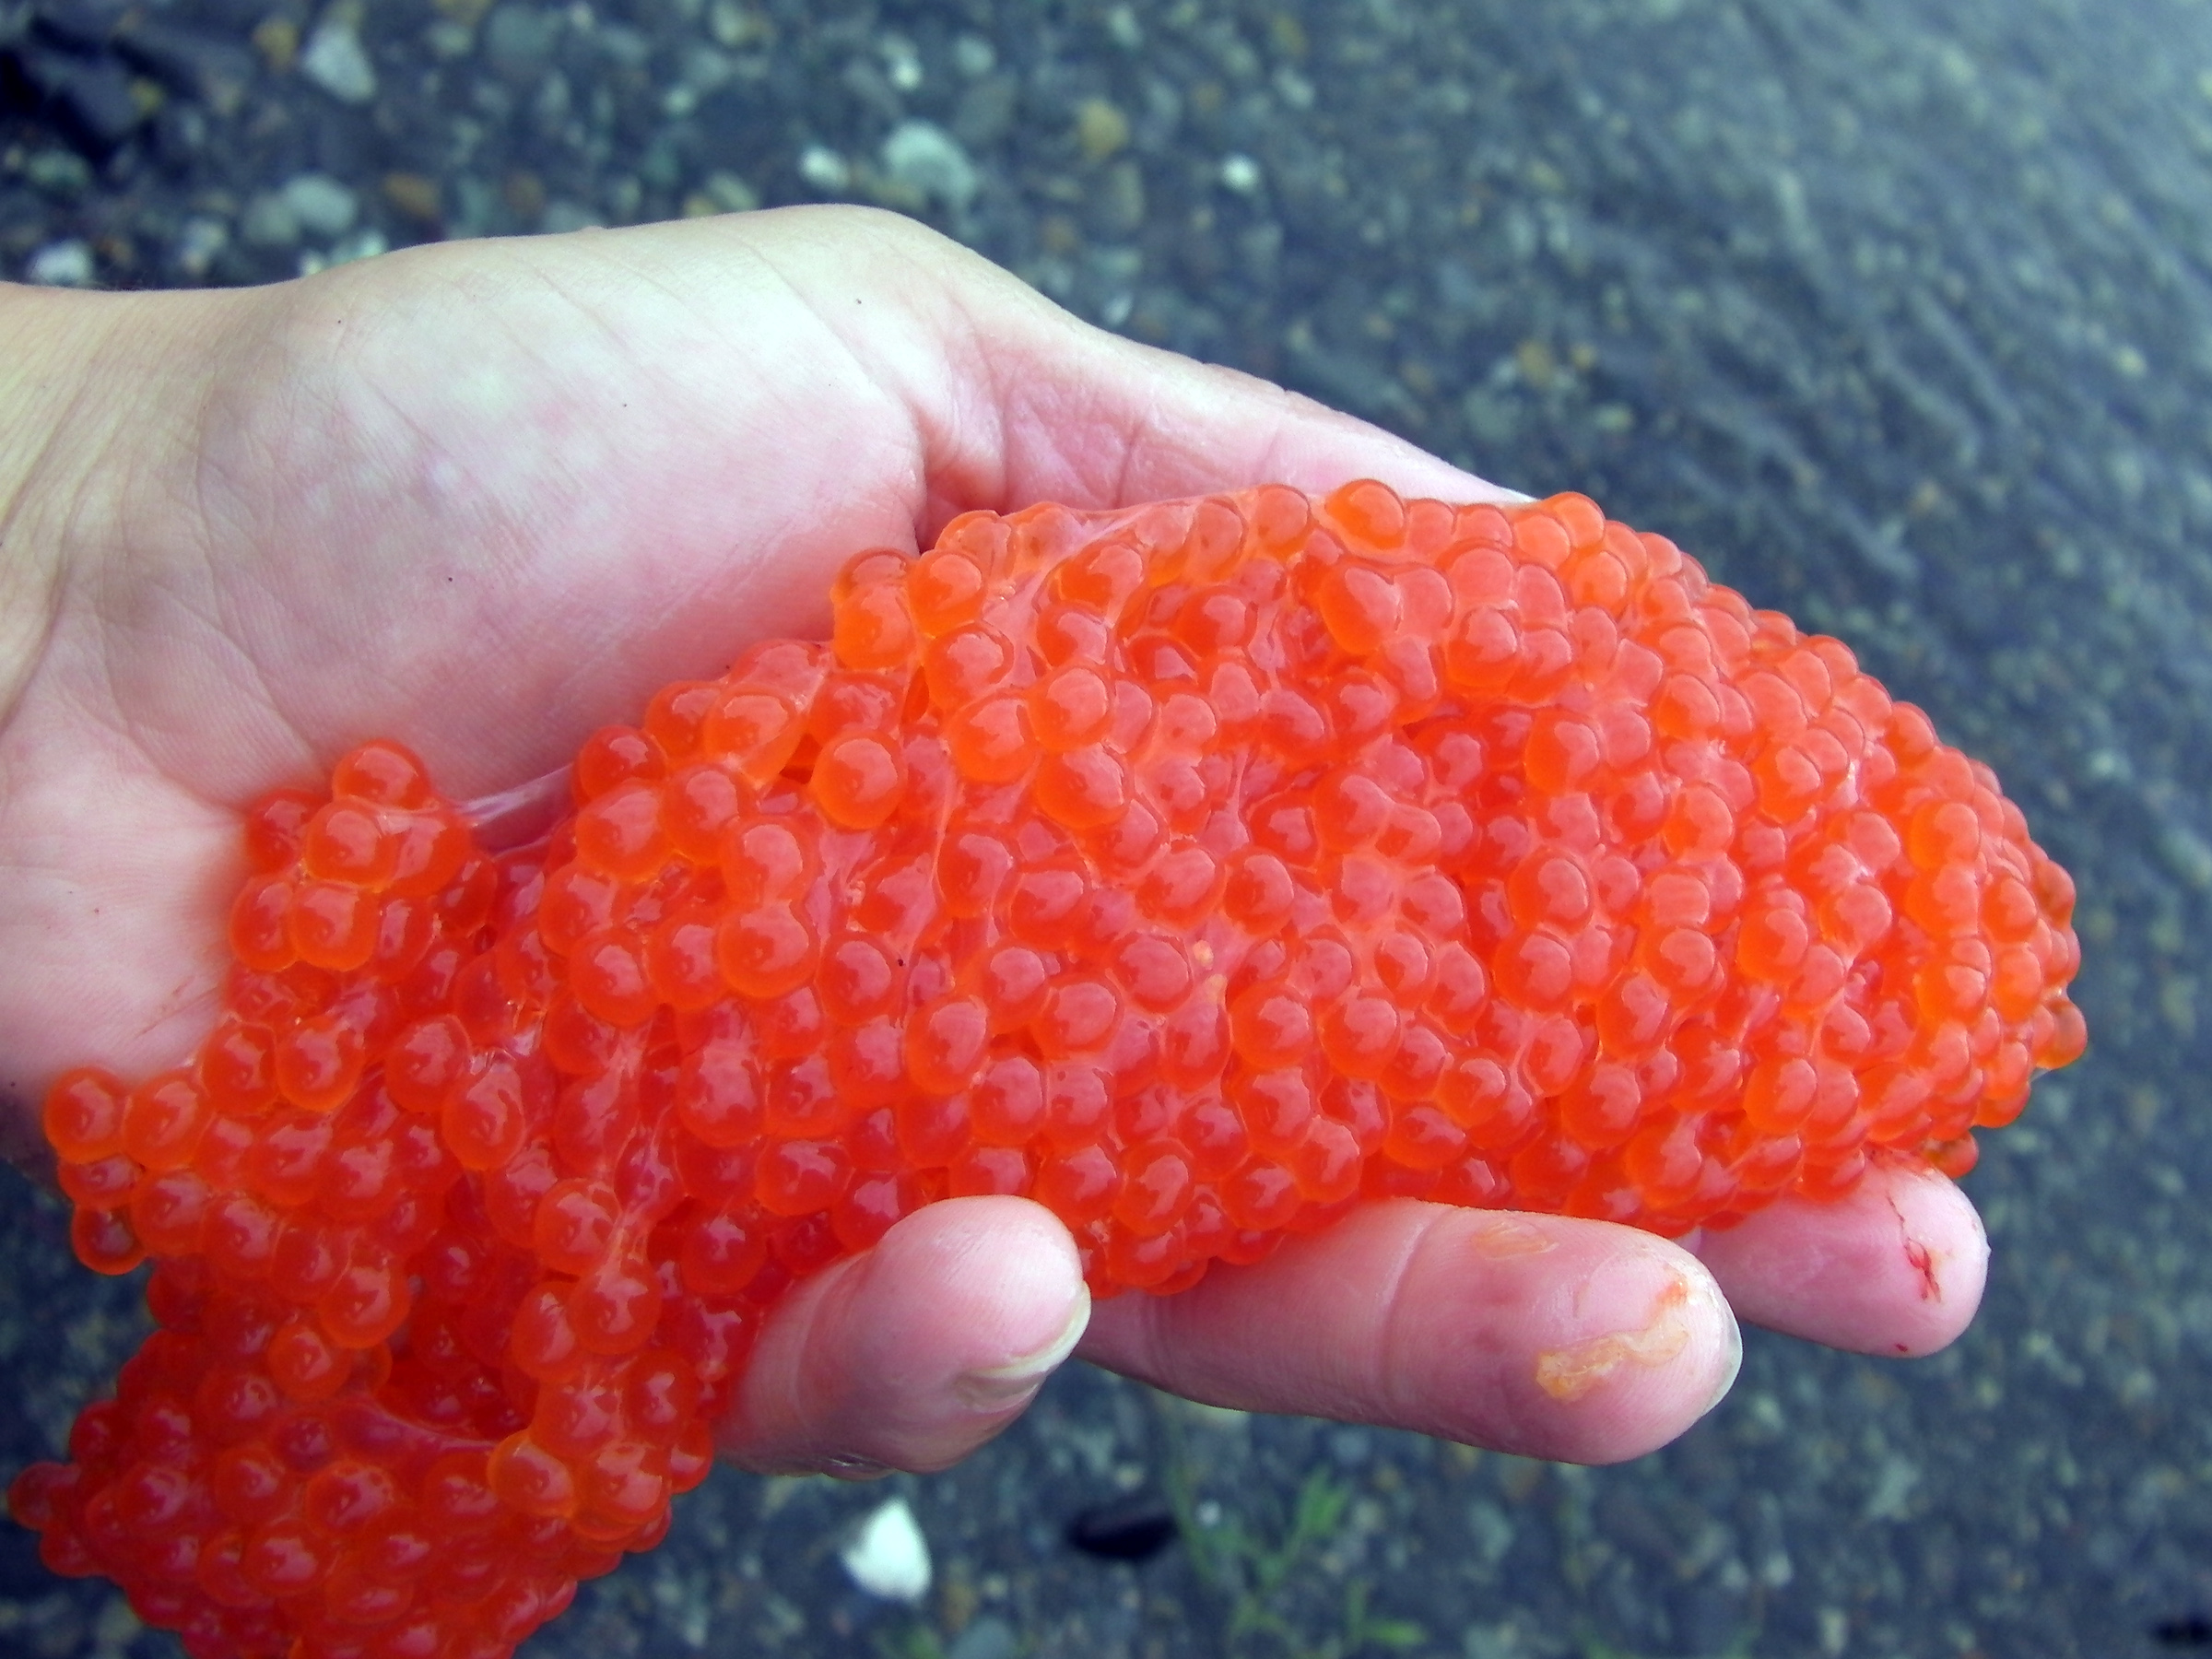 Here is a salmon egg skein that was removed from the salmon right after it was caught and bled. 